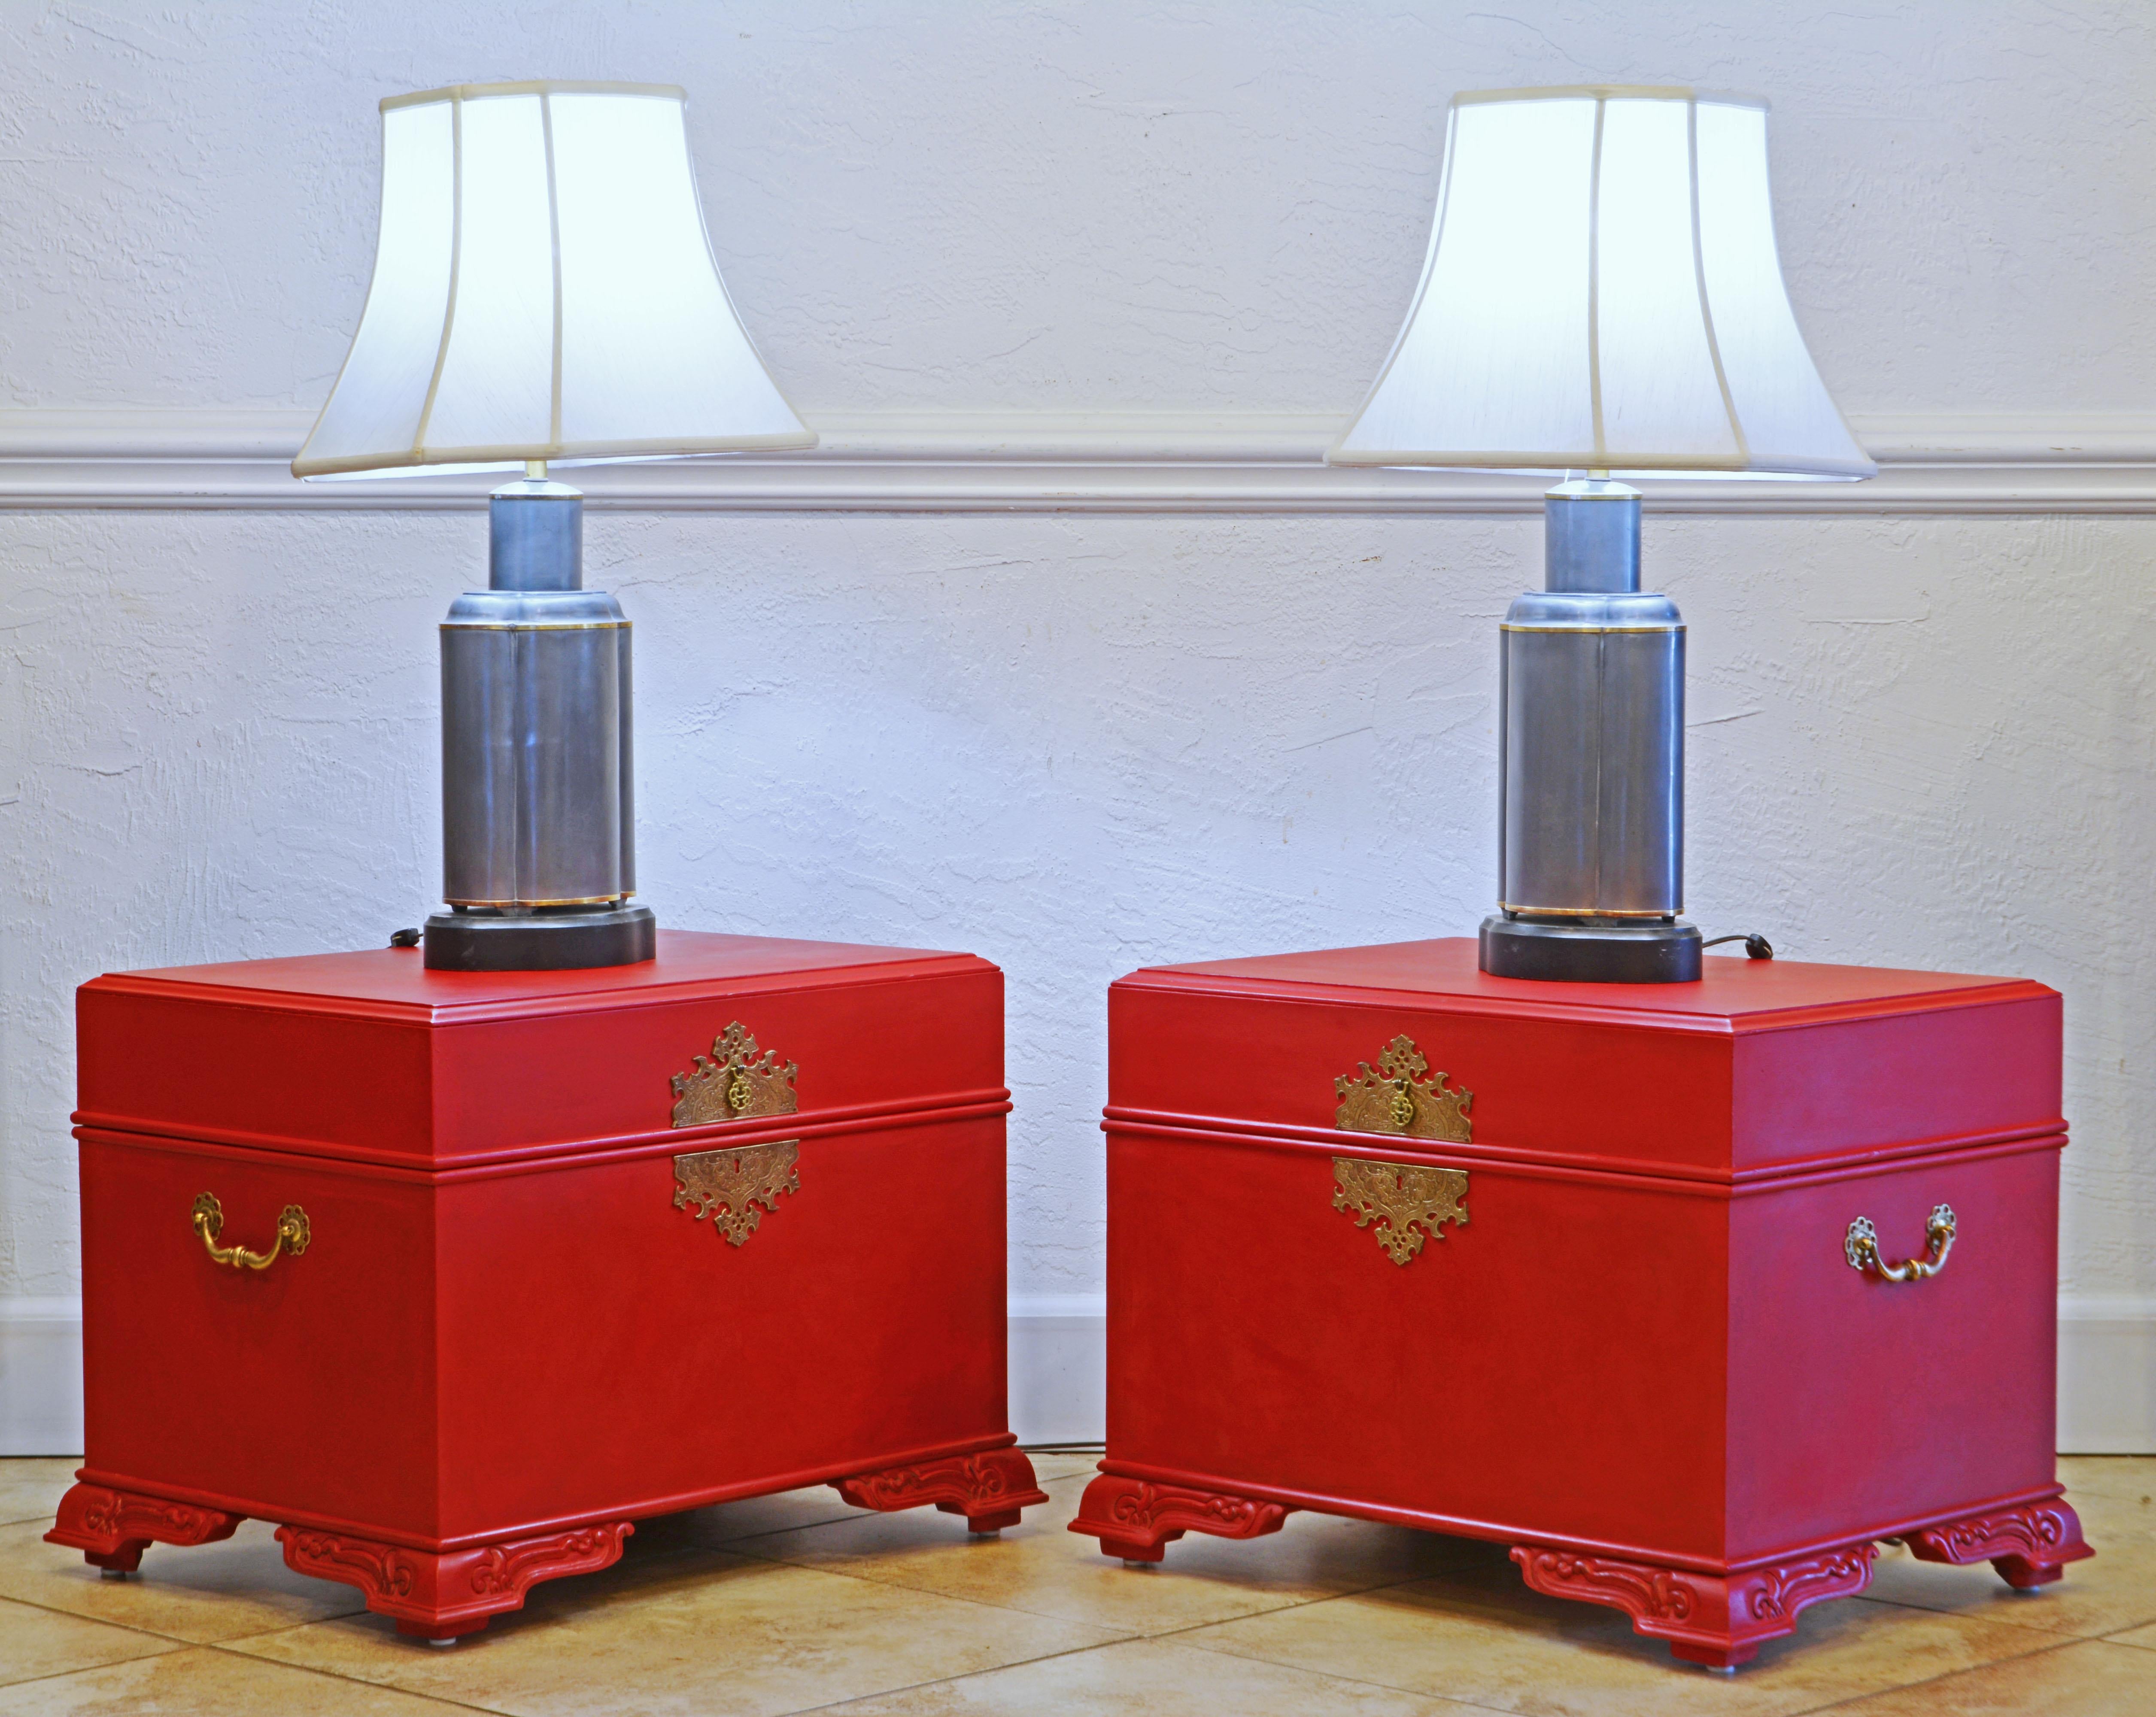 This pair of footed red lacquered chests or side tables feature tops that opens up to storage compartments with sliding compartments for smaller items. The Narra/Baul style chests are often from the Philippines where they for centuries have served